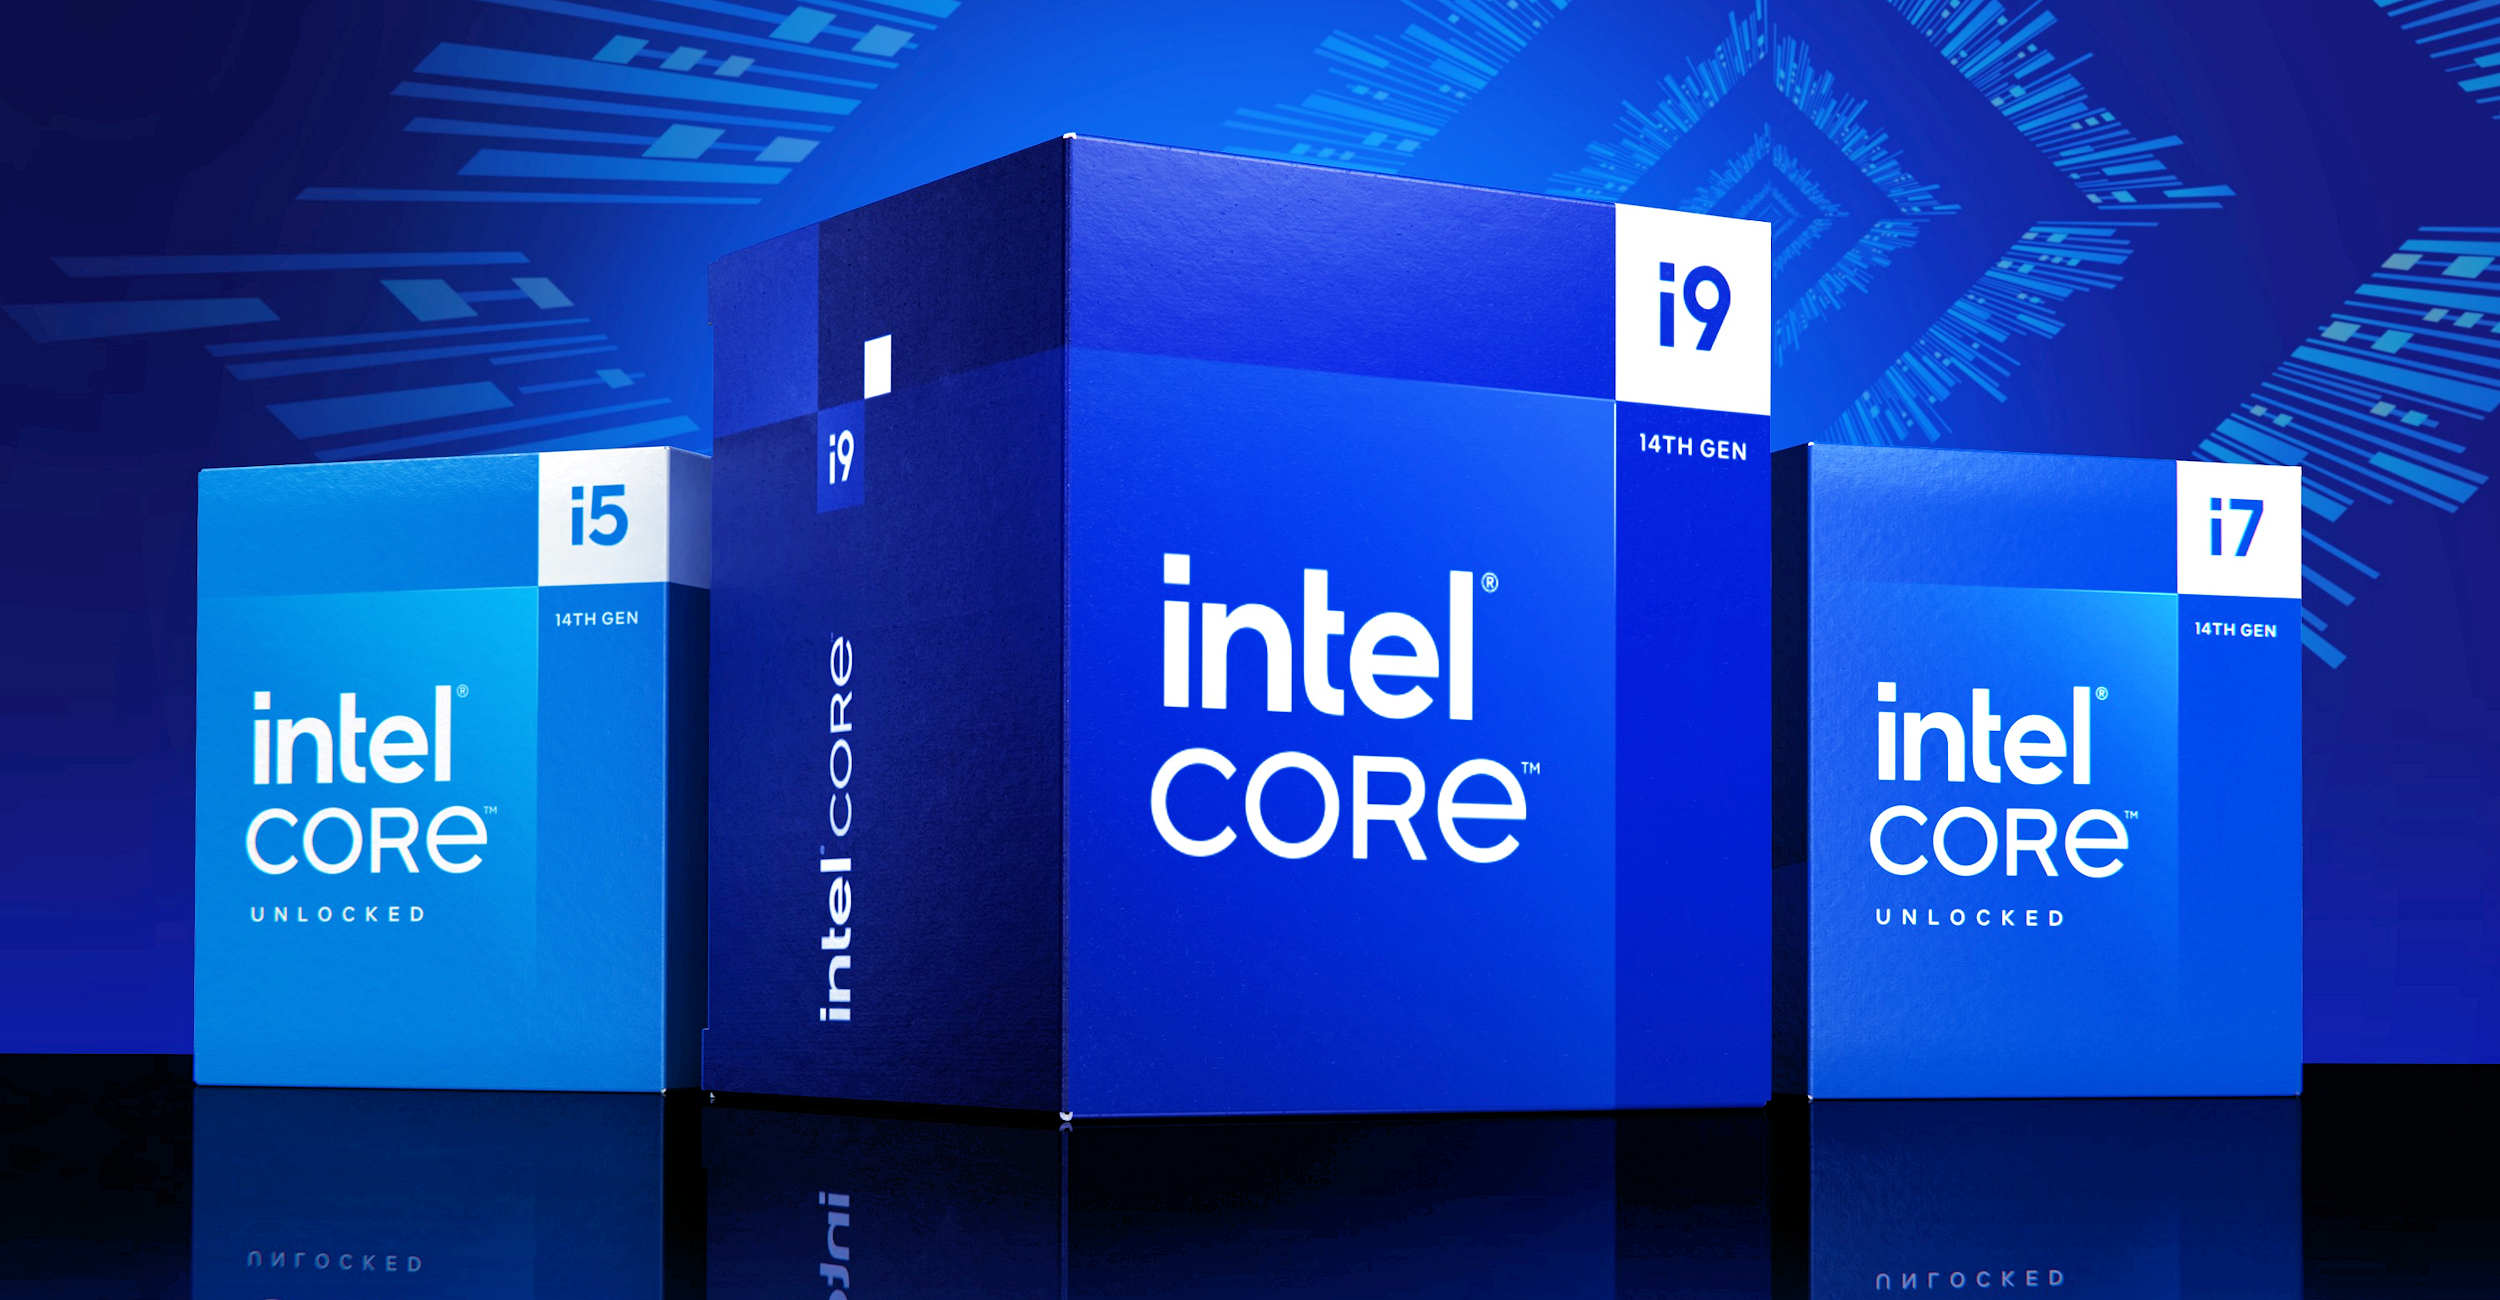 Intel confirms no recall for Raptor Lake CPUs, microcode won't fix affected units - VideoCardz.com